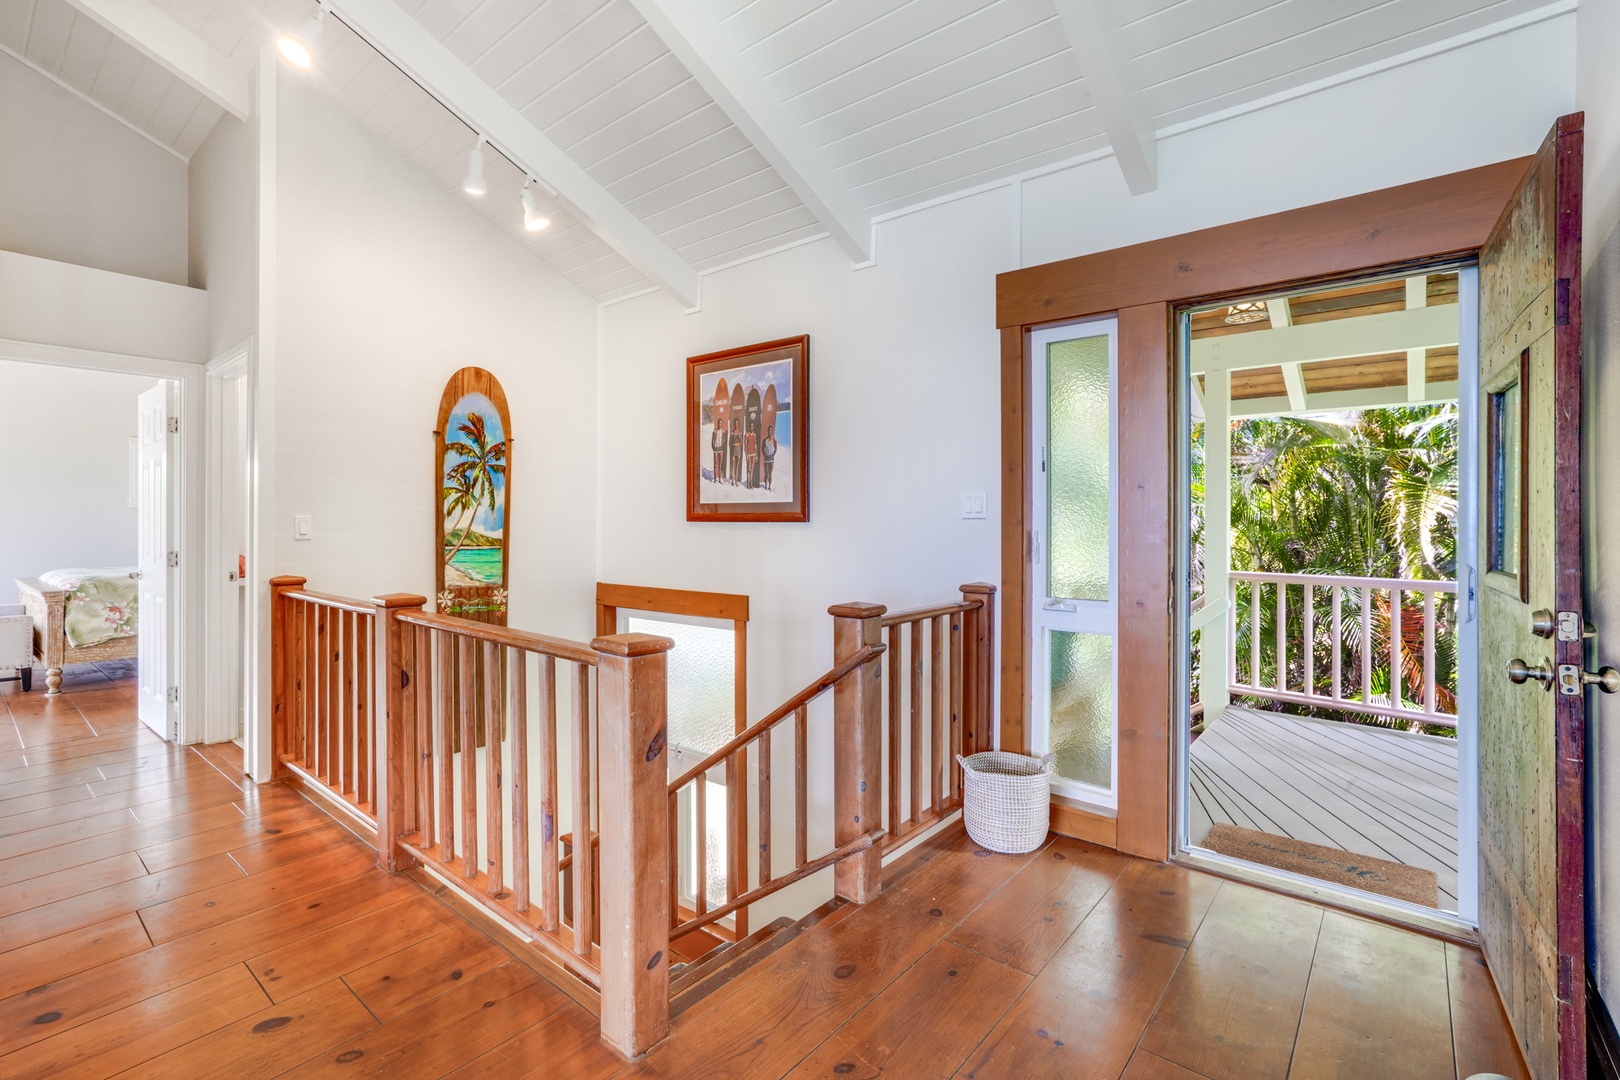 Princeville Vacation Rentals, Wai Lani - Navigate through the heart of our home.